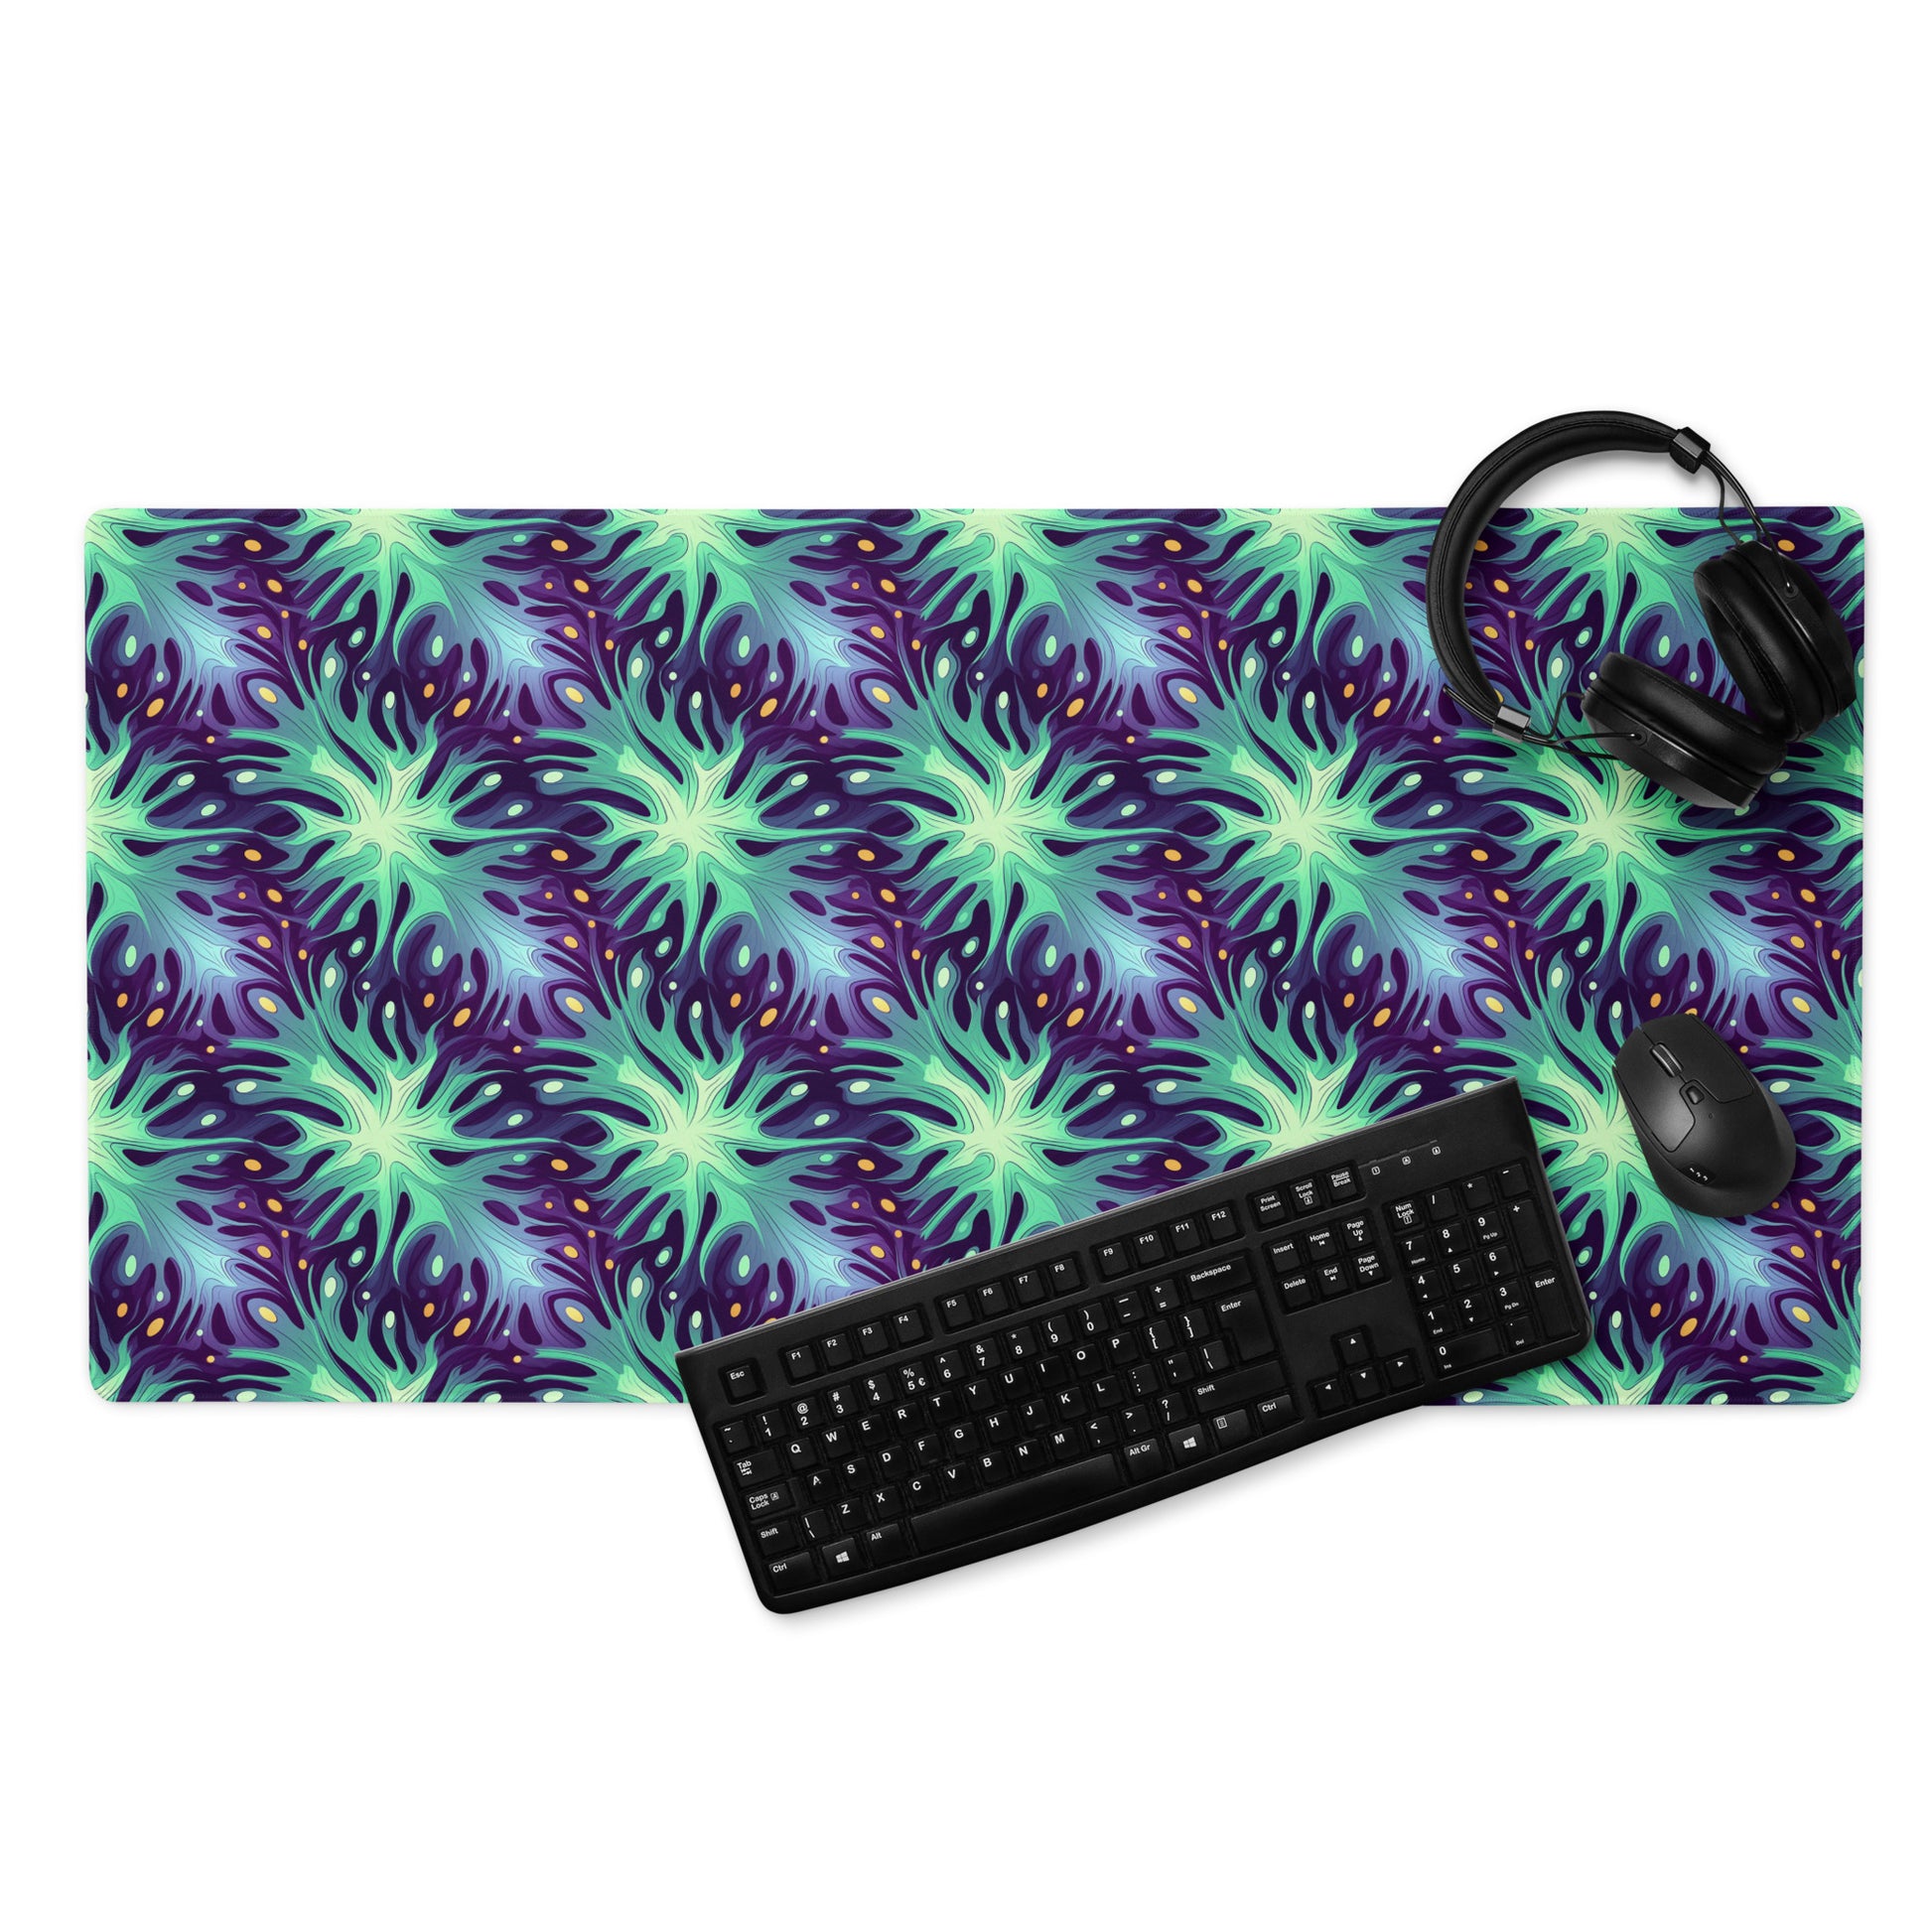 A 36" x 18" desk pad with a green and blue abstract pattern. With a keyboard, mouse, and headphones sitting on it.